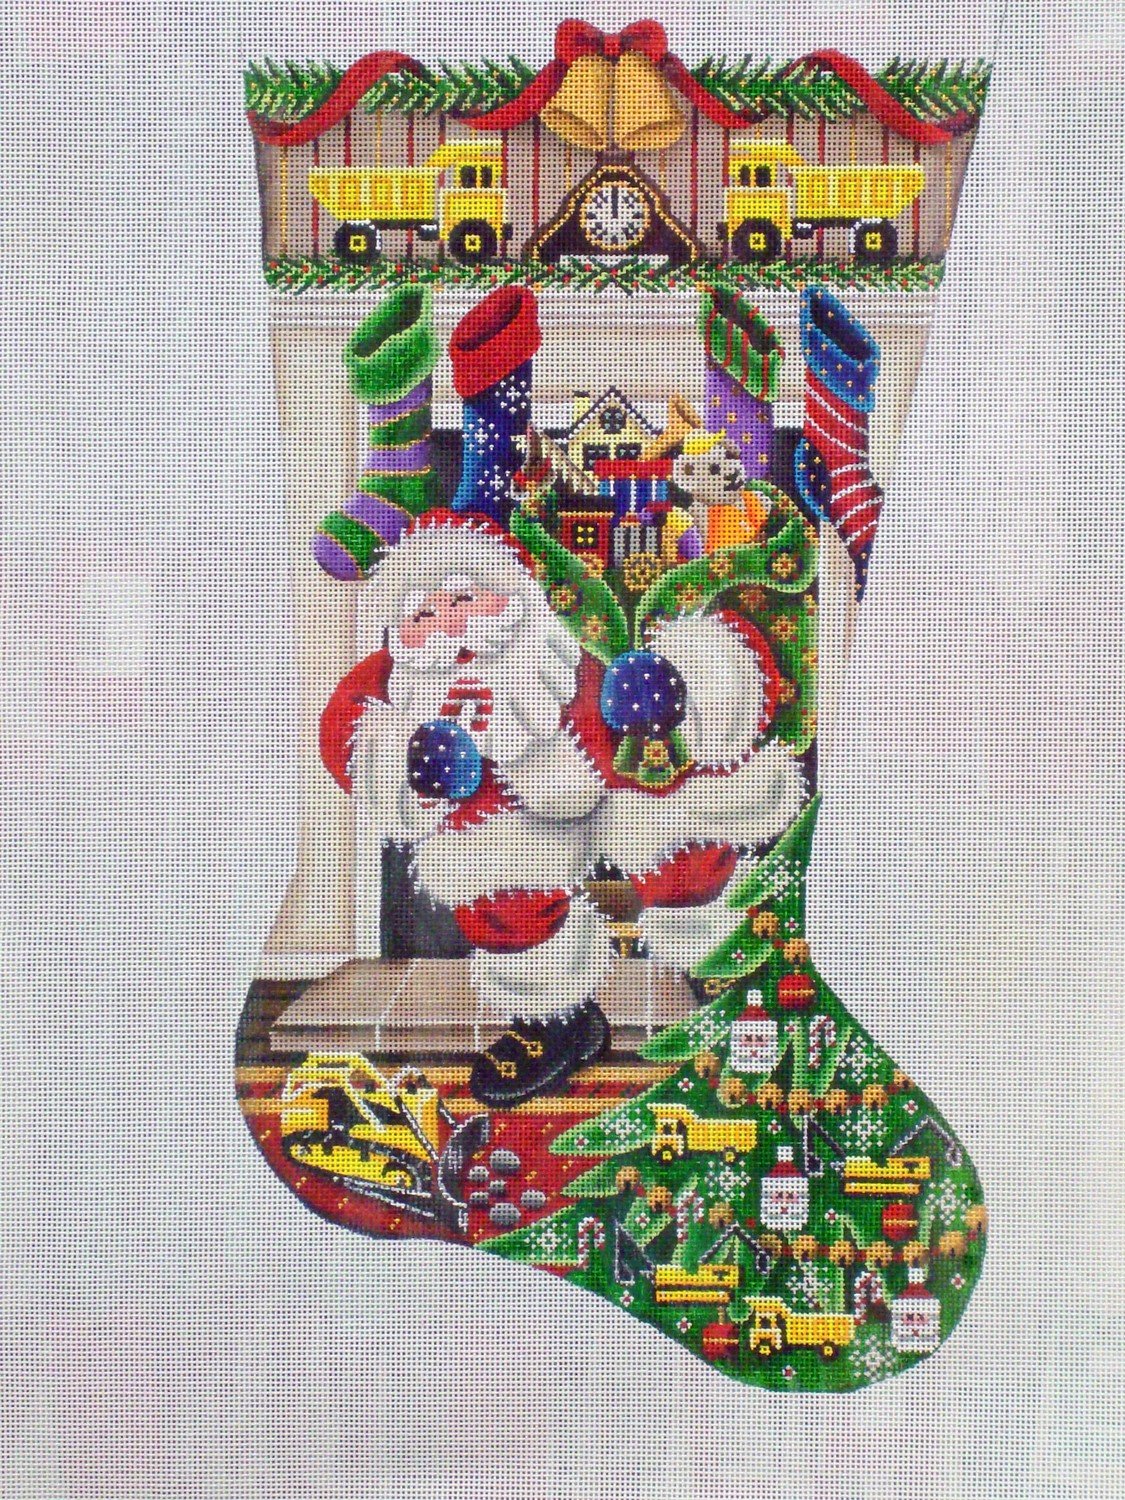 Out of the Fireplace Construction Toys Stocking   (handpainted from Rebecca Wood)*Product may take longer than usual to arrive*